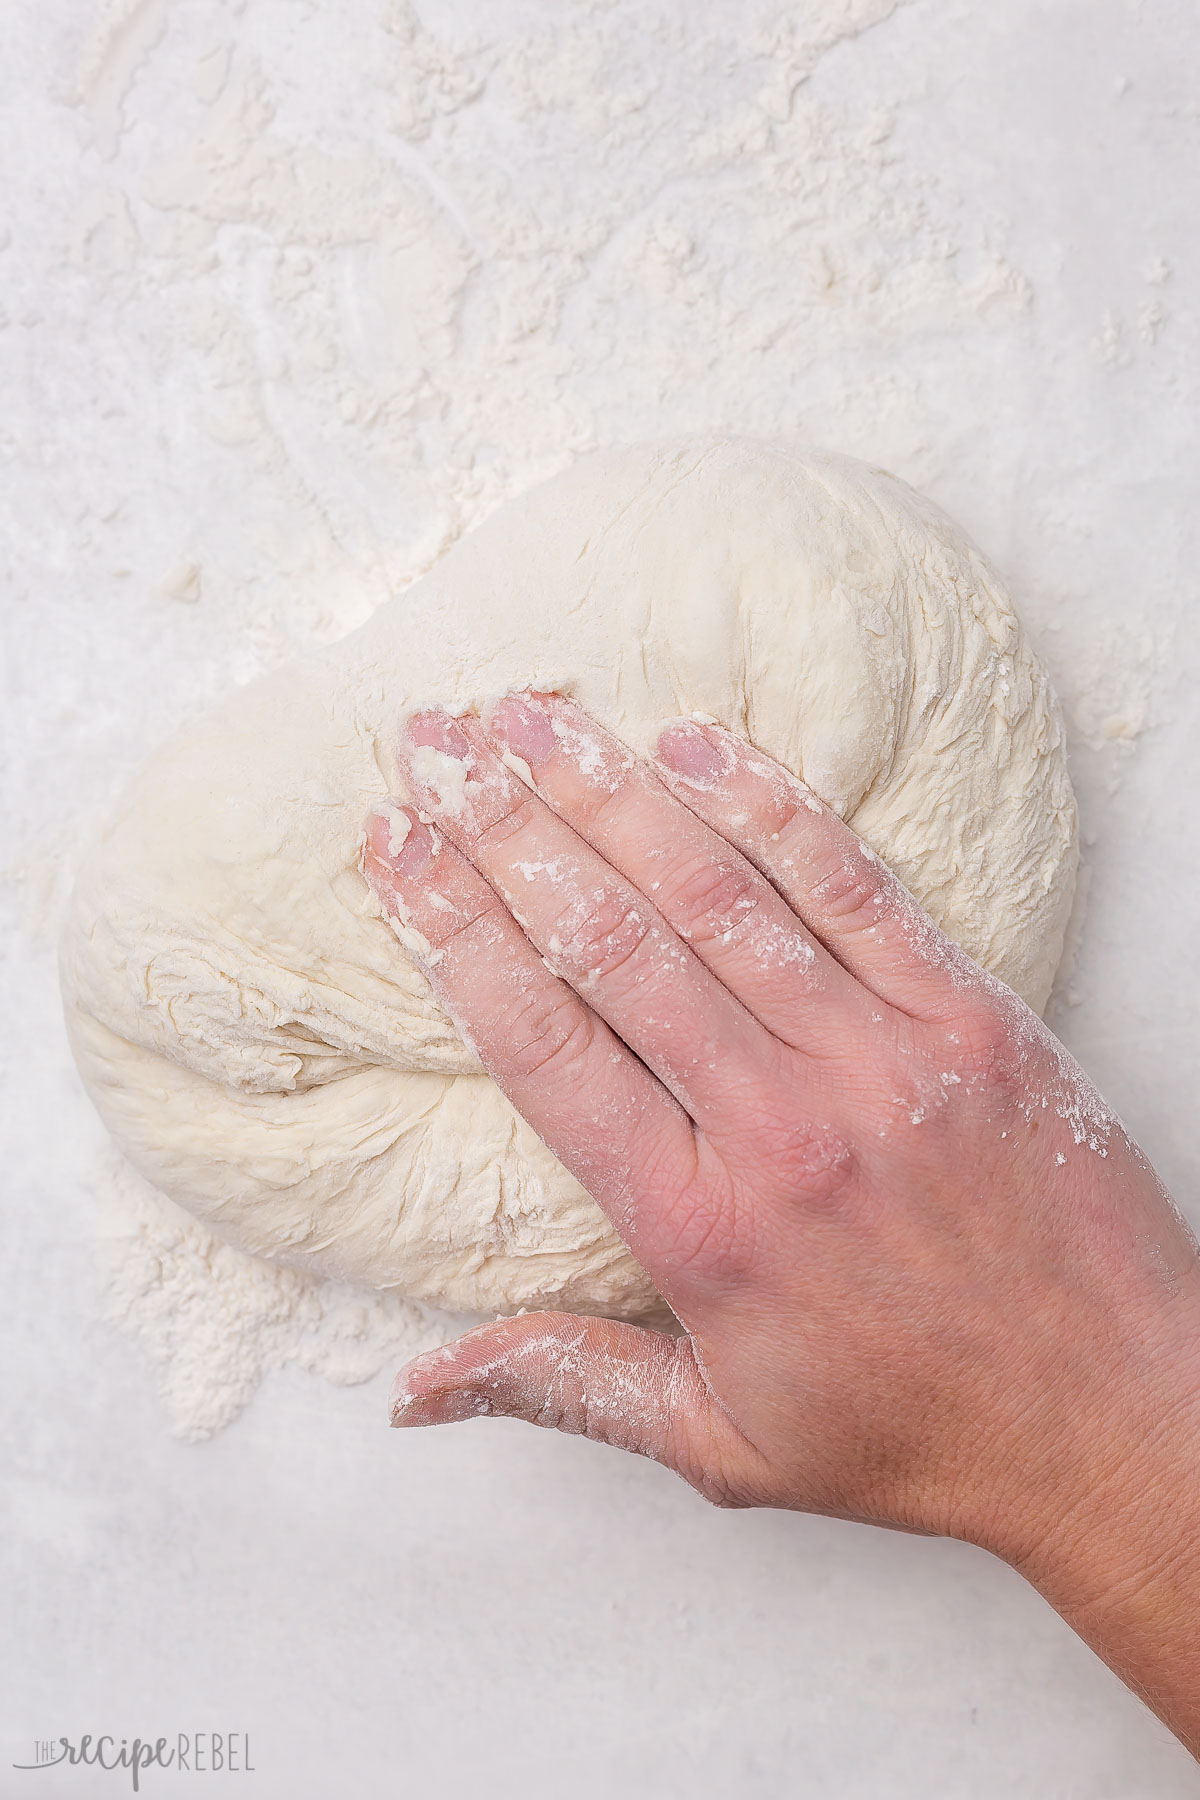 ball of dough on floured grey surface being rolled by hand.